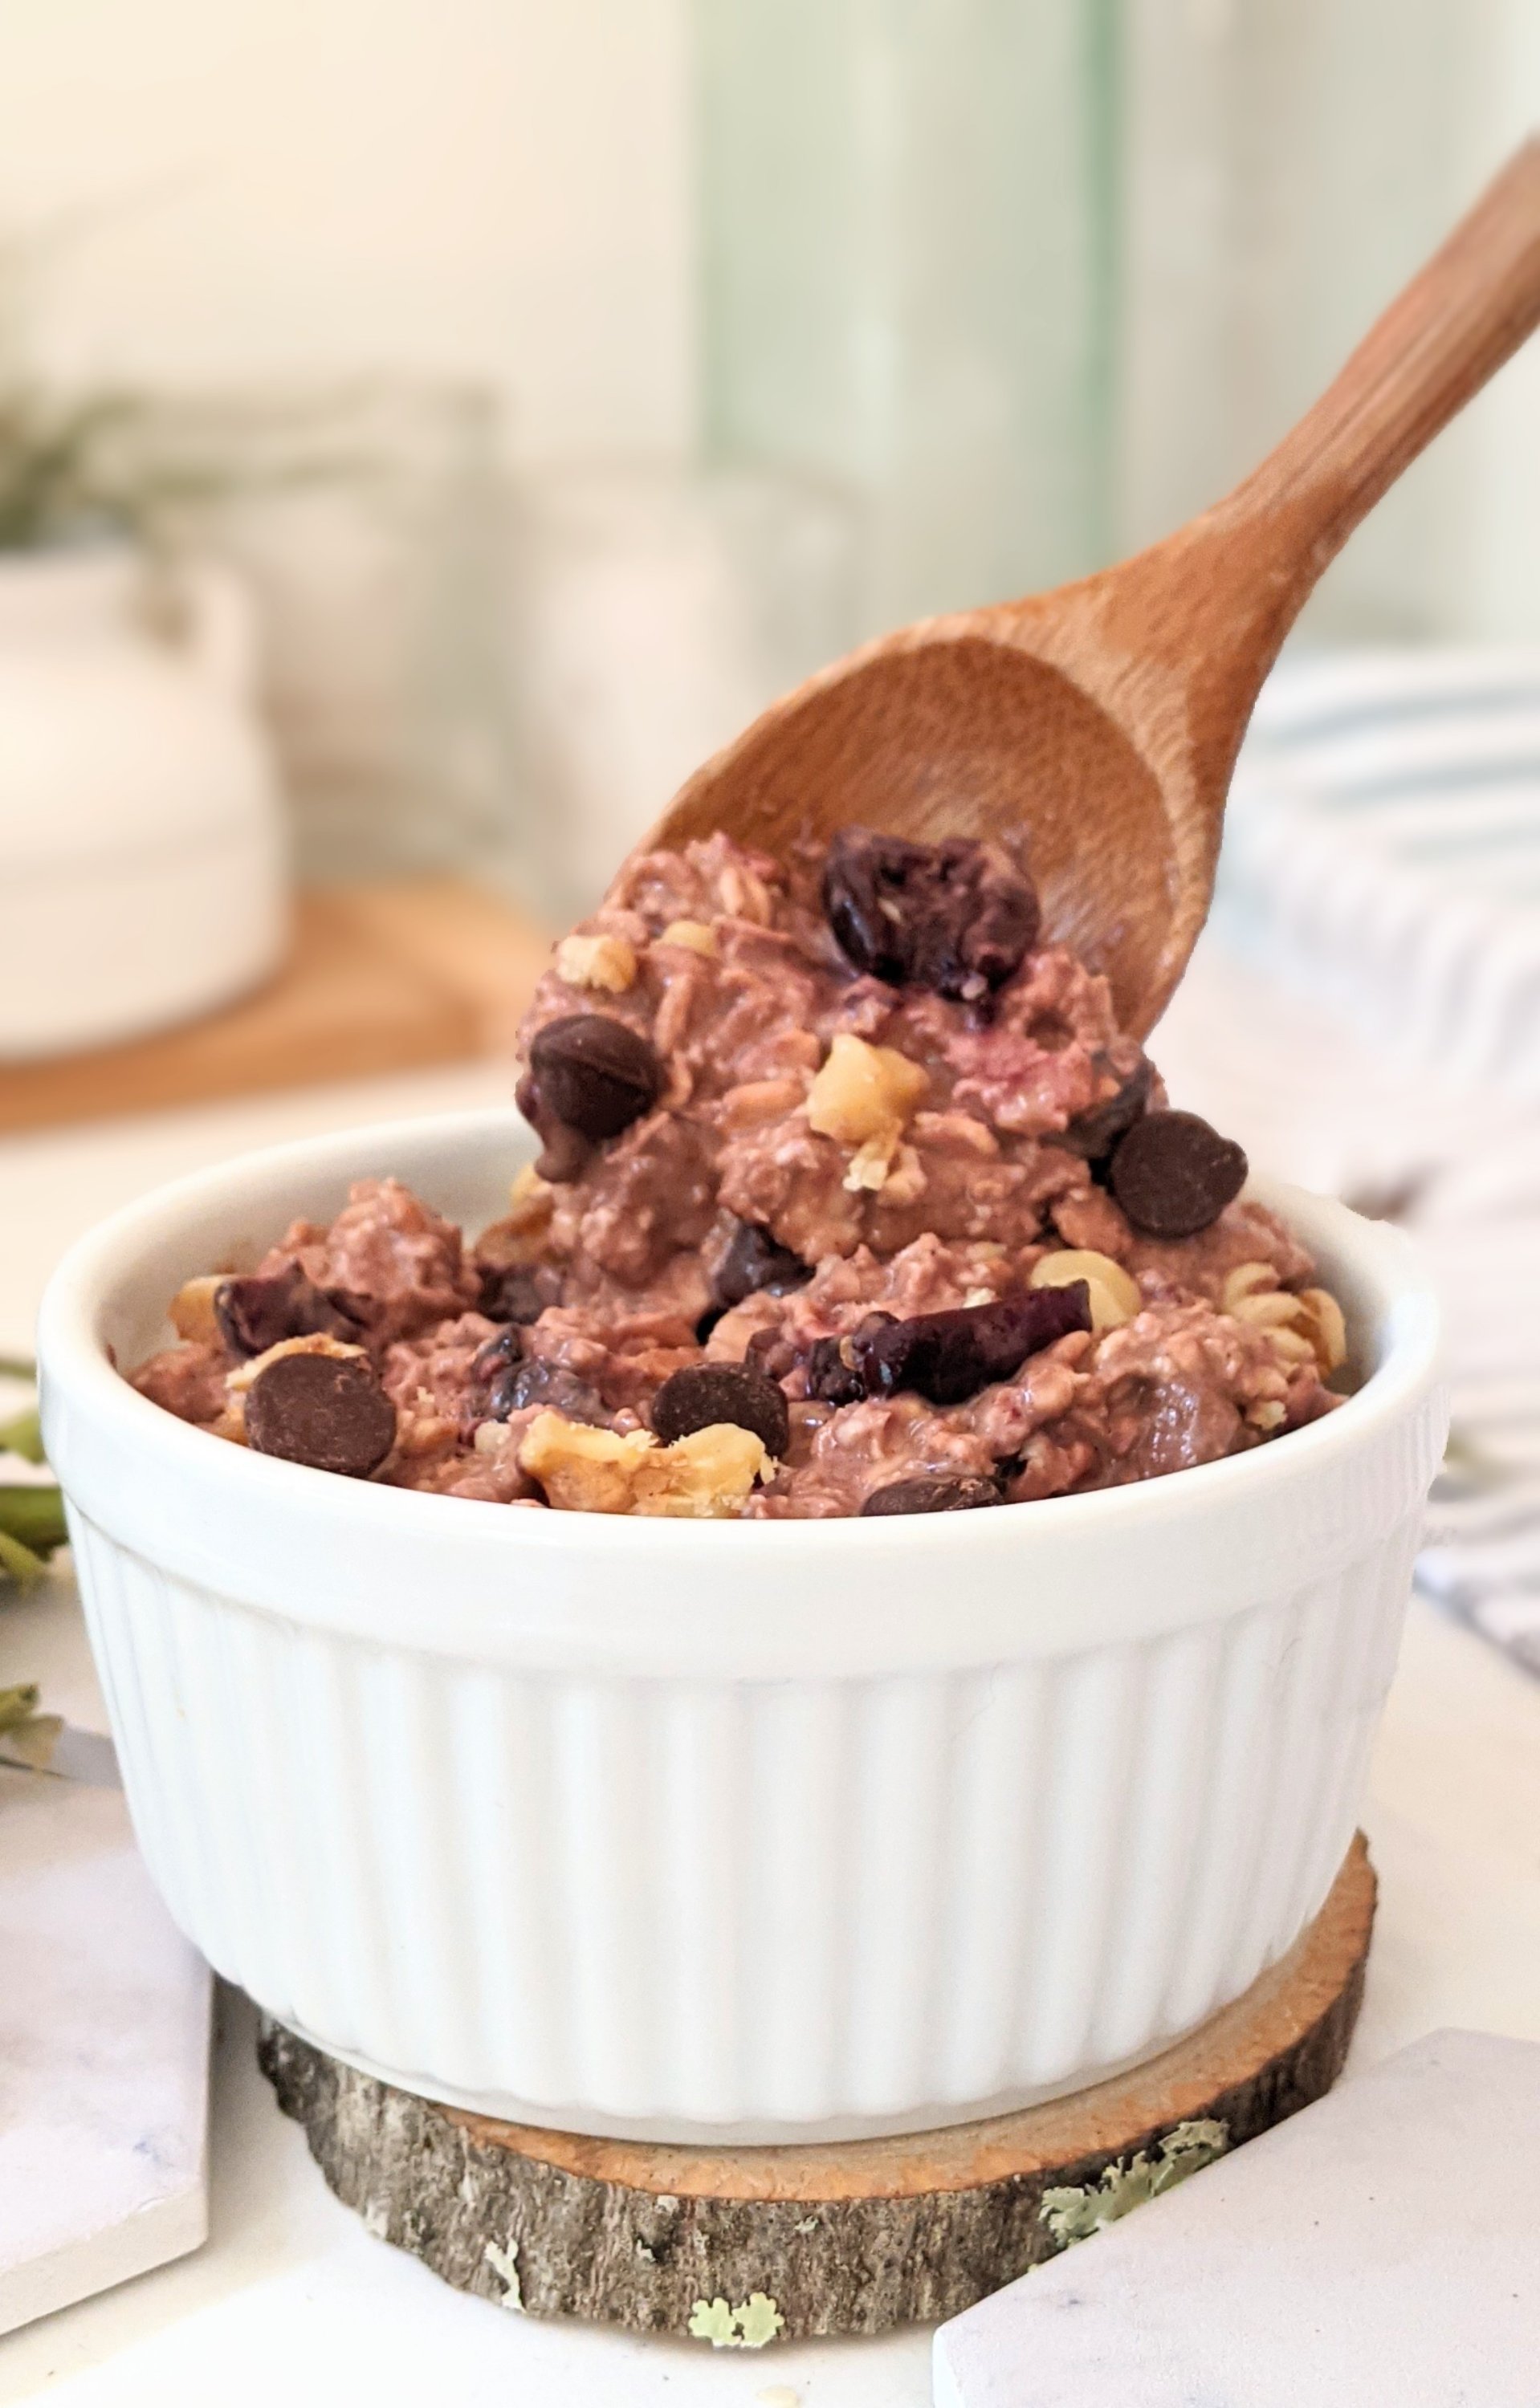 vegan on the go oatmeal recipes no cook breakfast recipes healthy nutritious breakfasts for kids chocolate recipes for breakfast healthy cherry oats with cacao gluten free vegan dairy free breakfasts